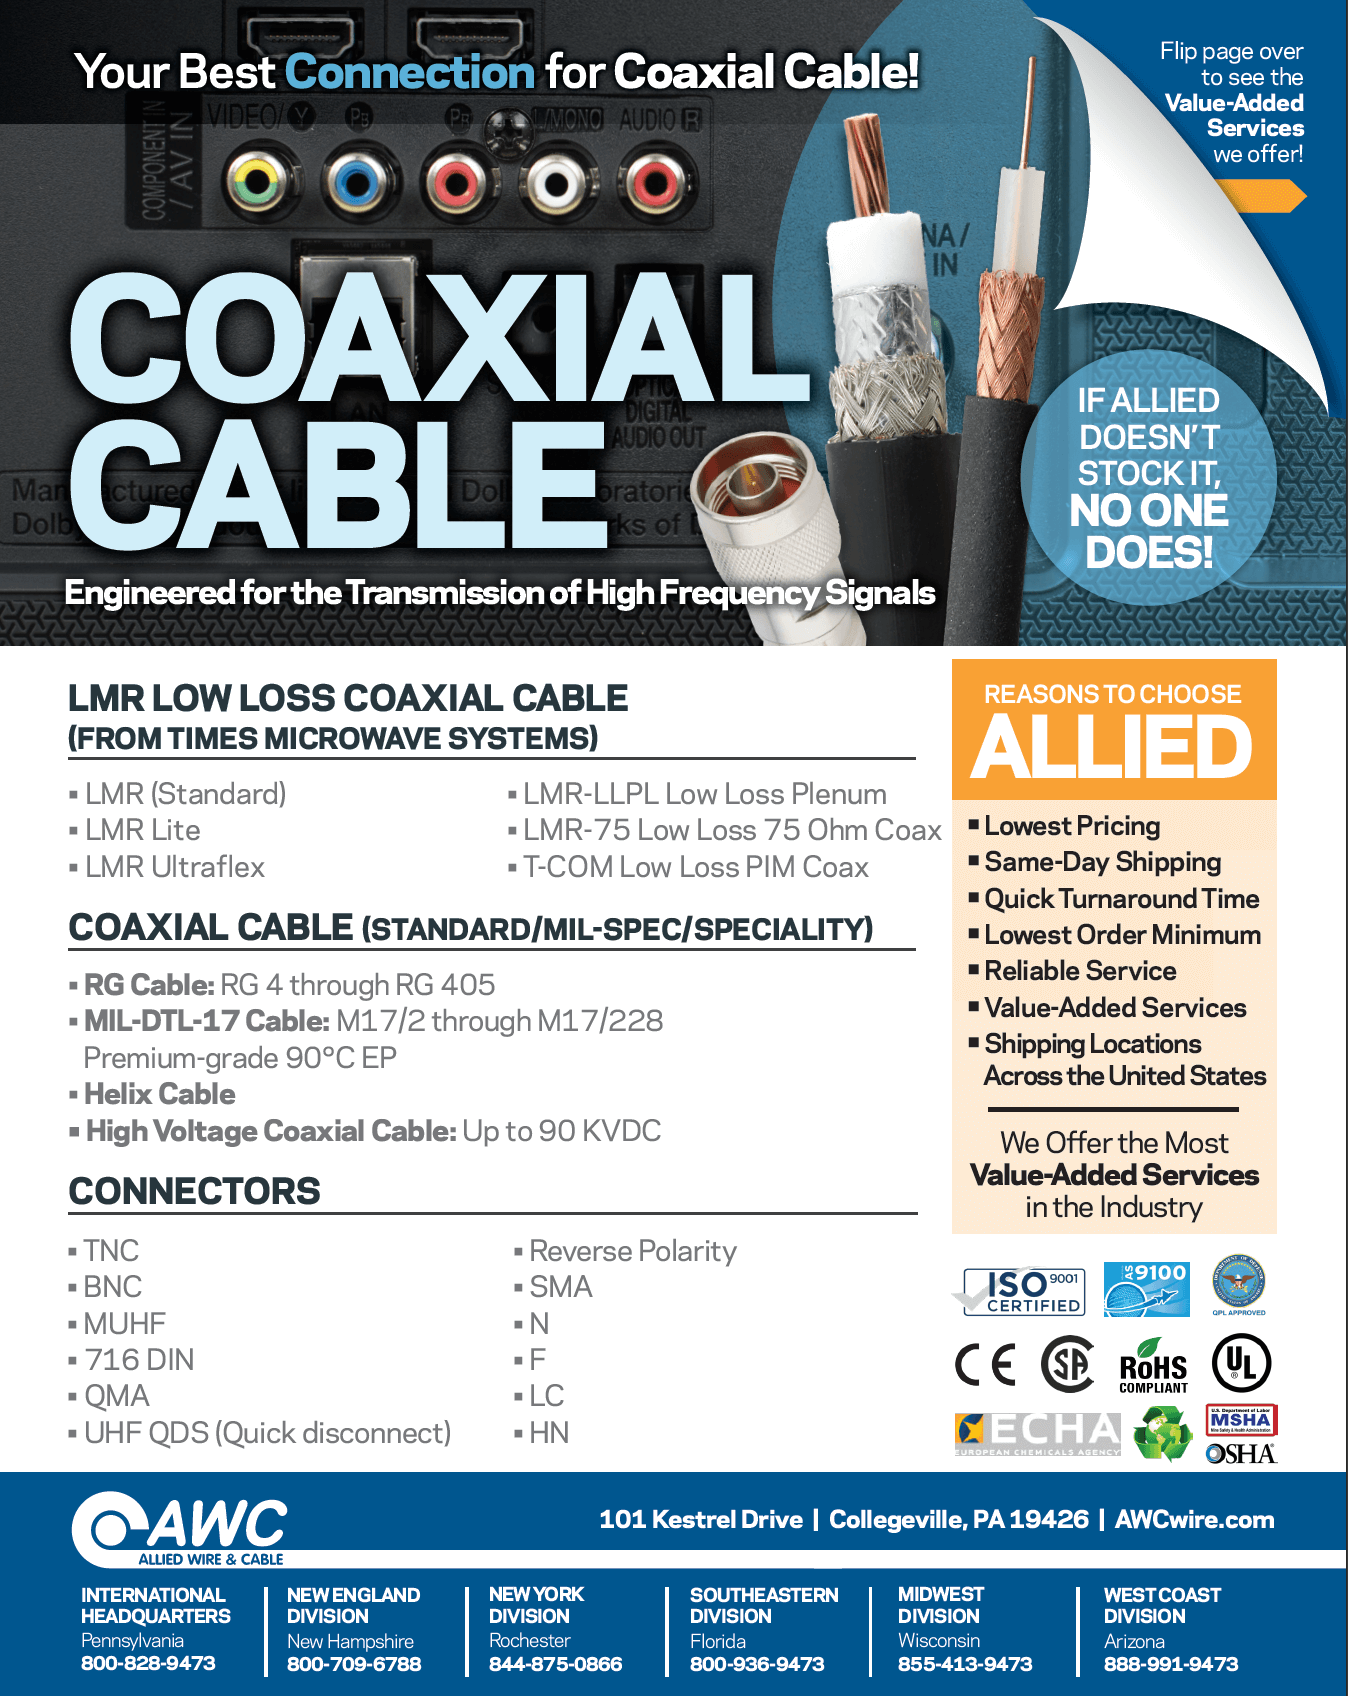 Coax Cable Line Card from Allied Wire & Cable